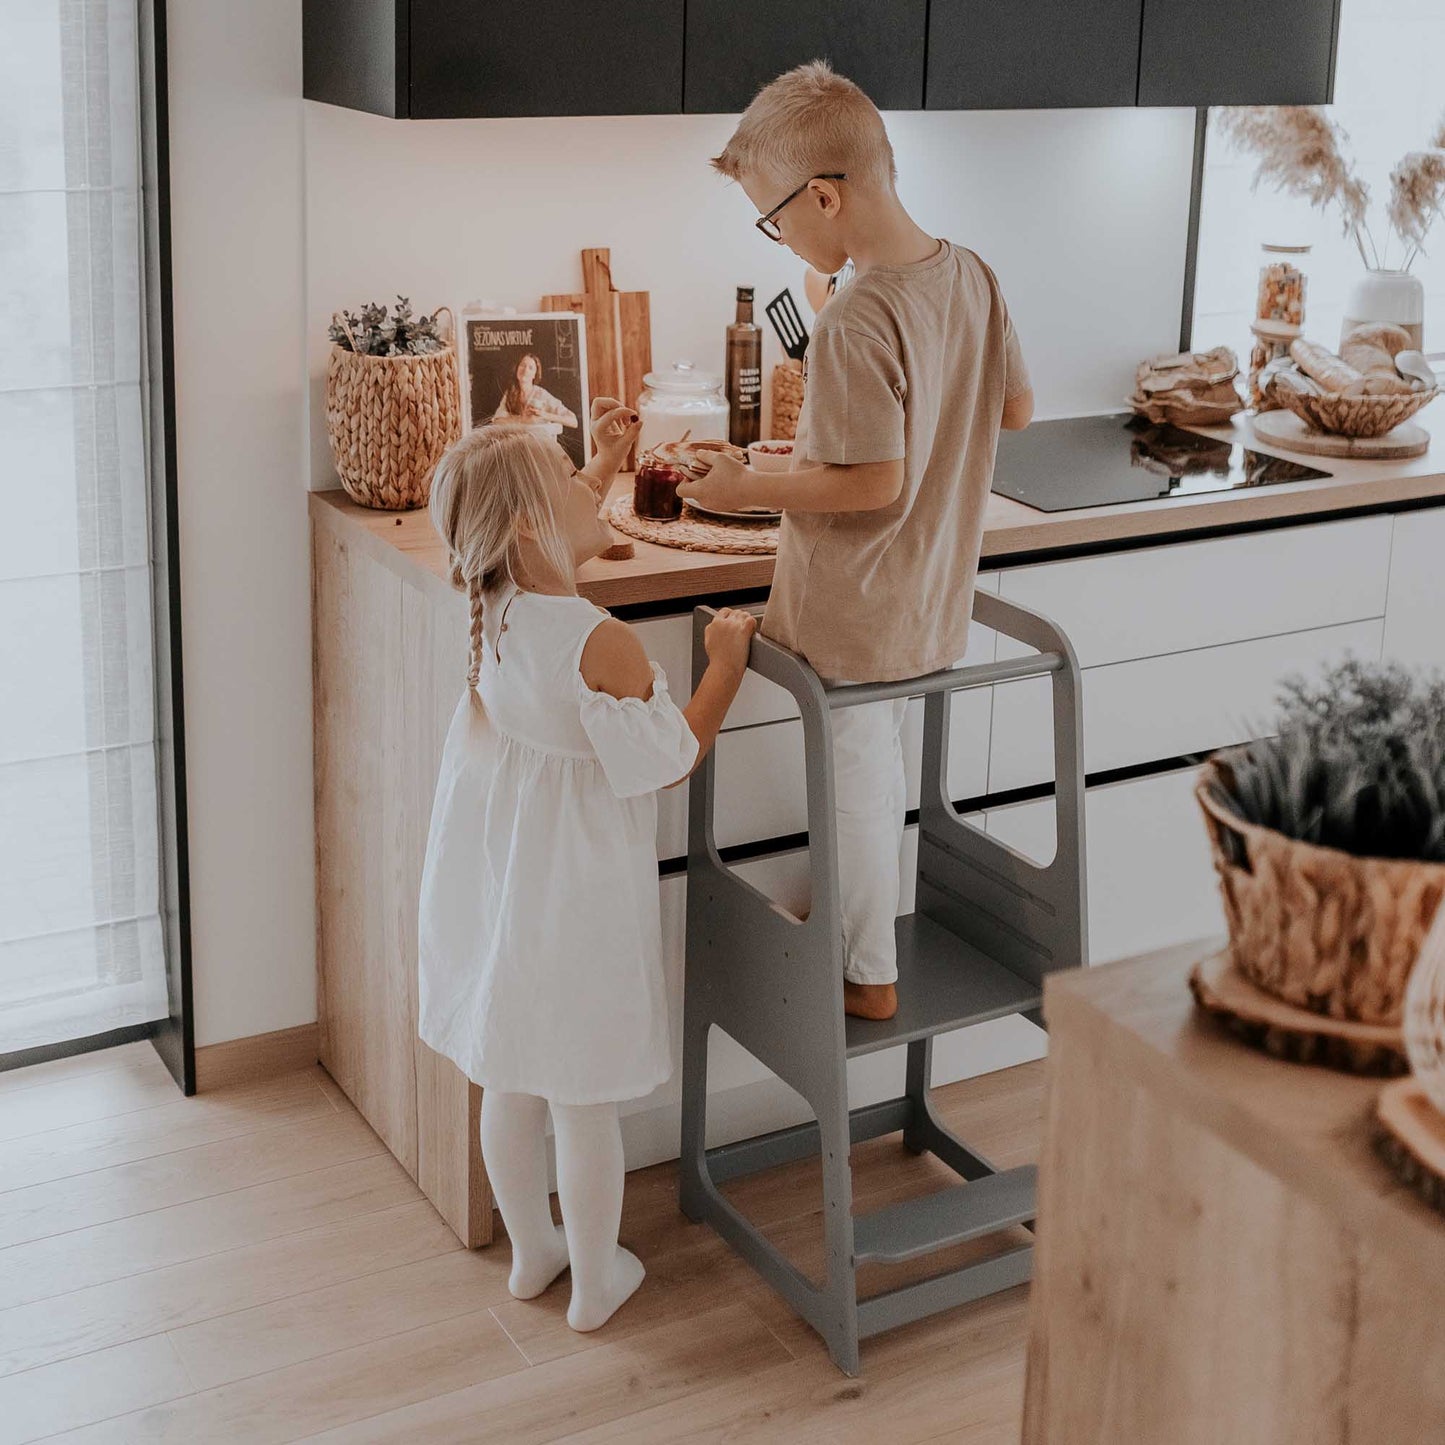 Two toddlers standing on a 2-in-1 Convertible kitchen tower - table and chair in a kitchen.